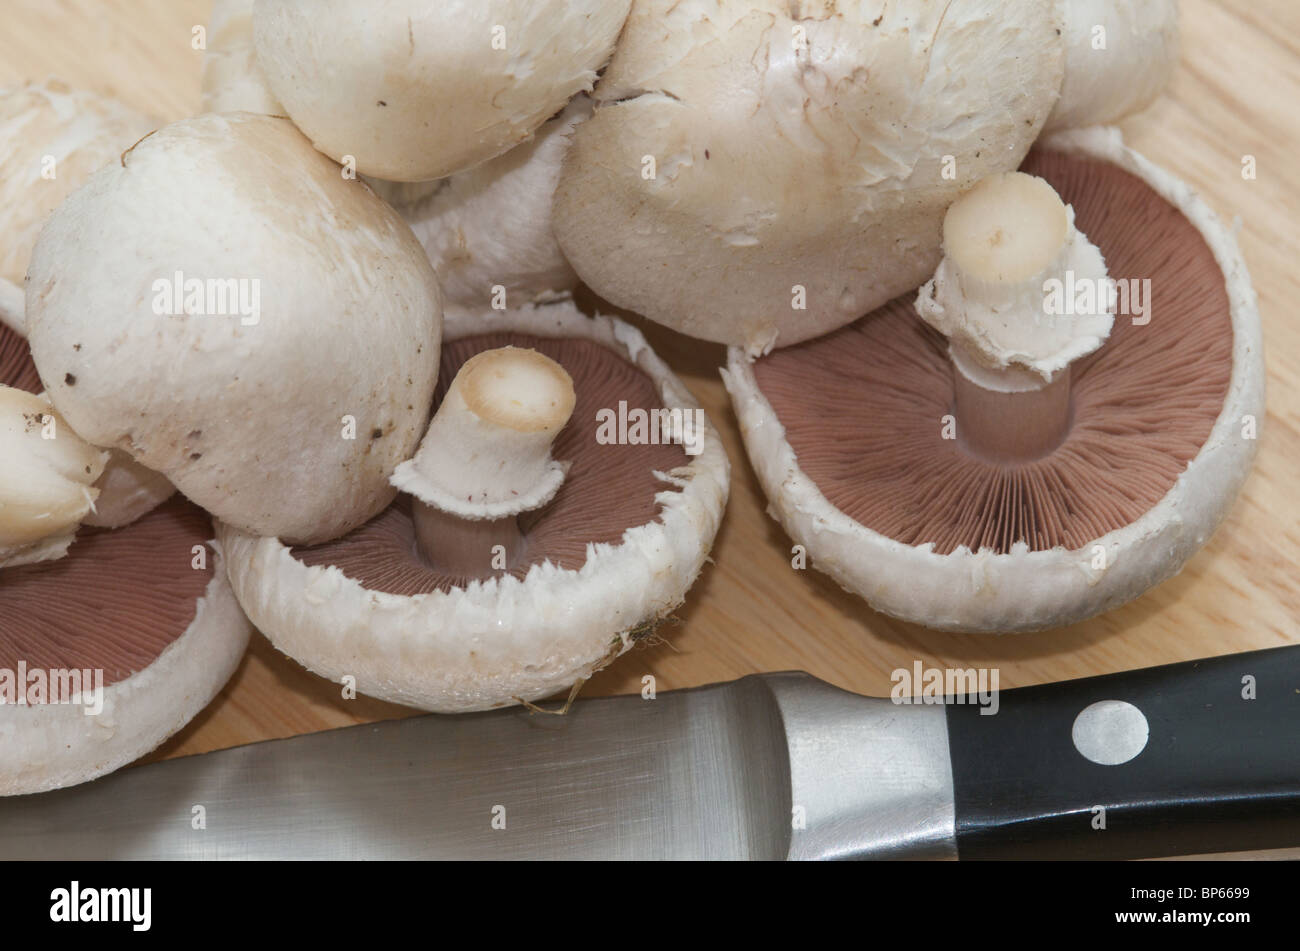 Organic field or meadow mushrooms (Agaricus campestris) ready for use in the kitchen Stock Photo